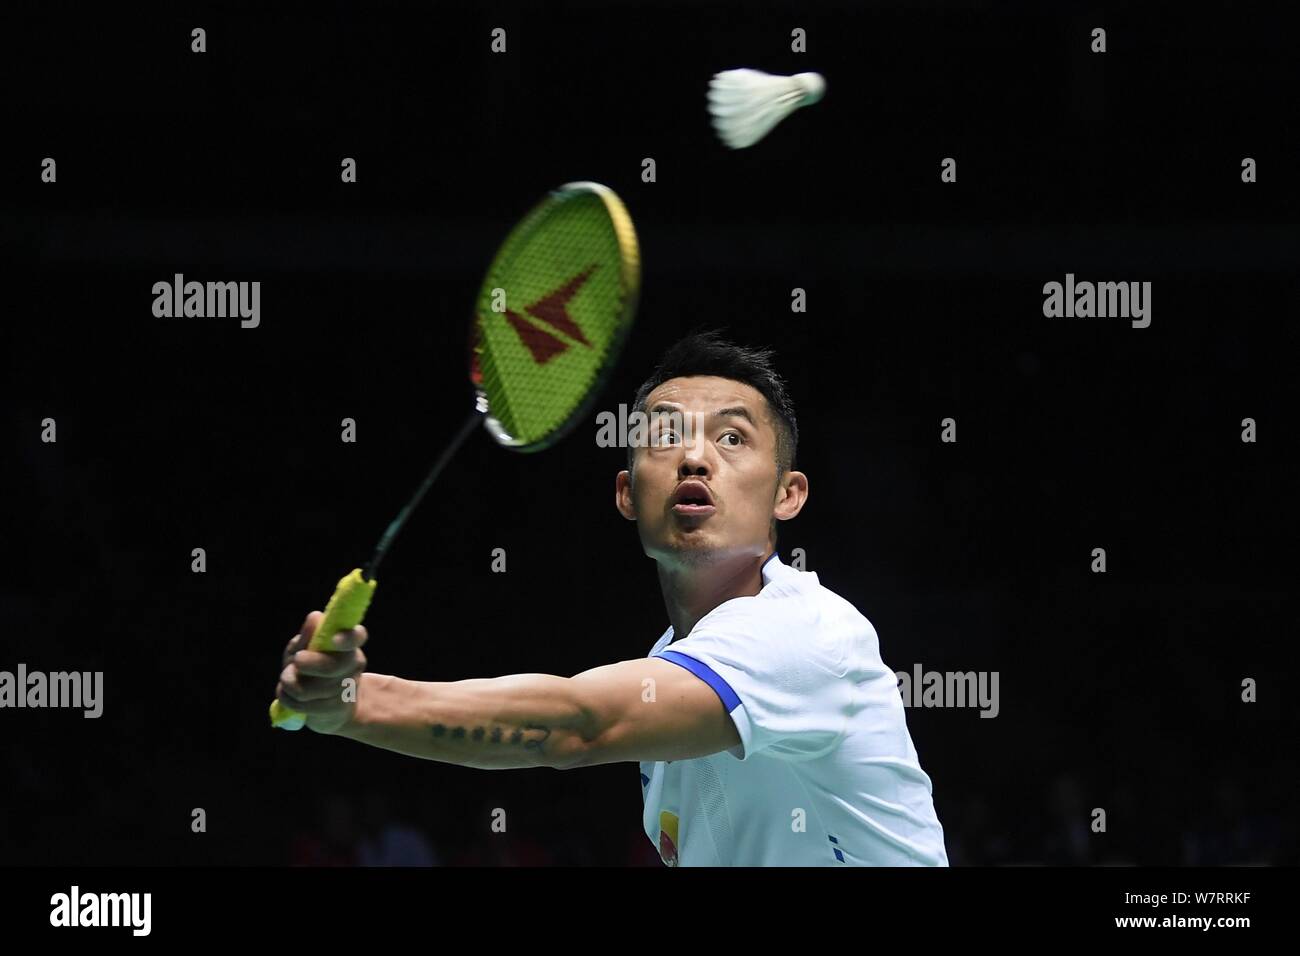 Lin Dan of China returns a shot to Lee Chong Wei of Malaysia in their semifinal match of the men's singles during the 2017 Badminton Asia Championship Stock Photo